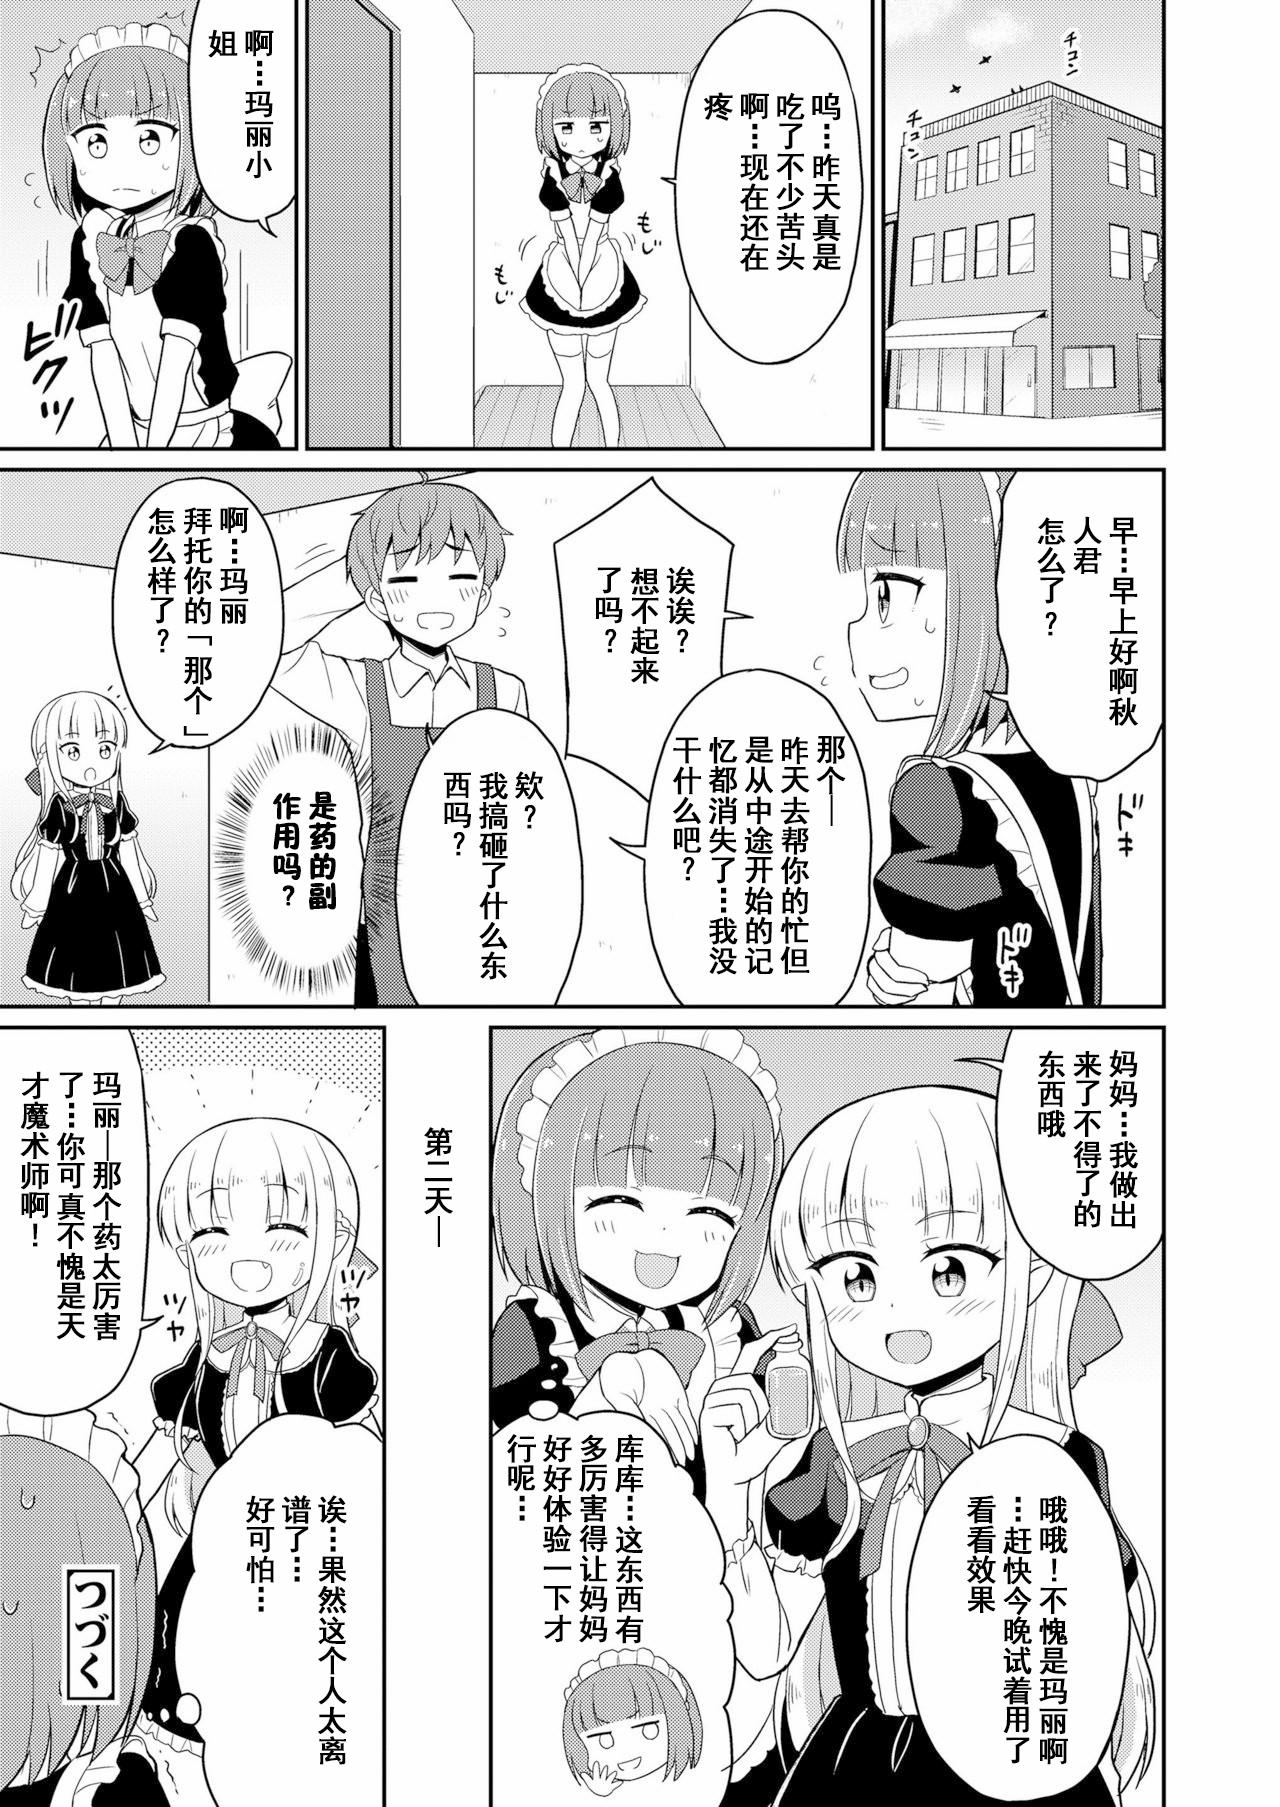 Flexible Cafe Eternal e Youkoso! Ch. 5 | 欢迎来到永远咖啡厅！第五话 Eating Pussy - Page 25